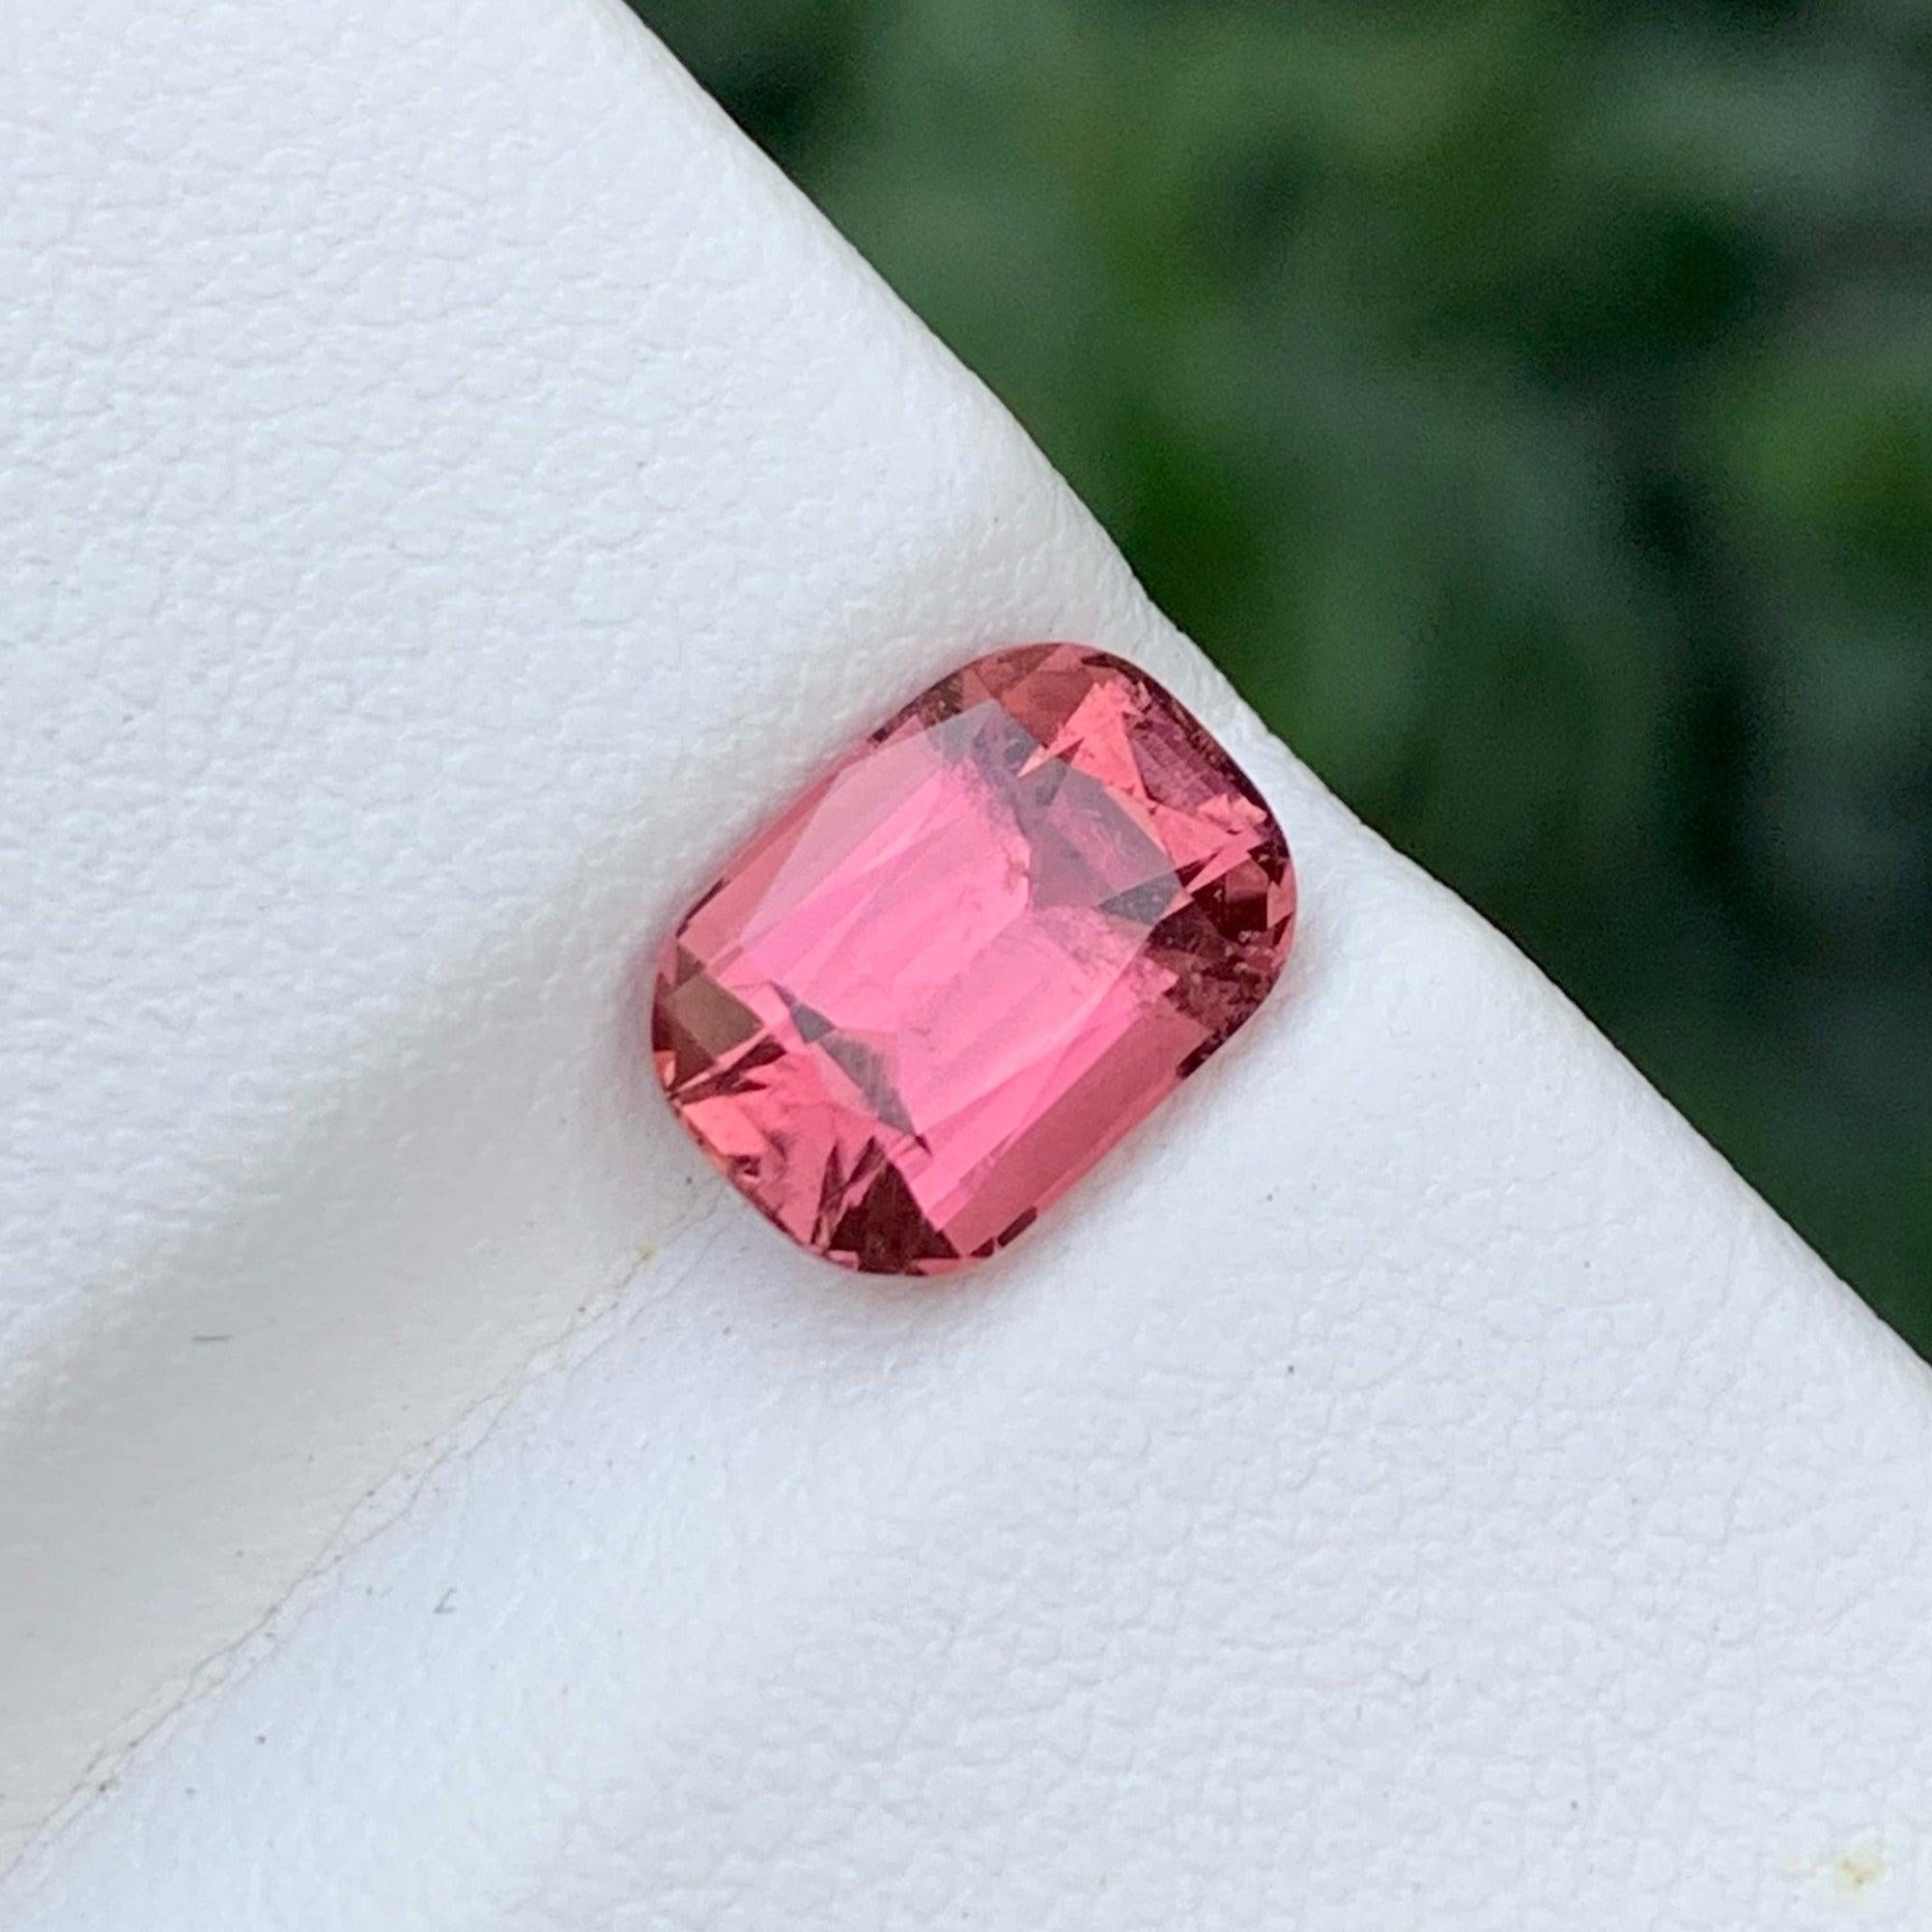 Adorable Sweet pink Tourmaline Gemstone of 2.25 carats from Cango has a wonderful cut in a Cushion shape, incredible Pink Color. Great brilliance. This gem is VVS Clarity.

Product Information
GEMSTONE TYPE:	Adorable Sweet pink Tourmaline